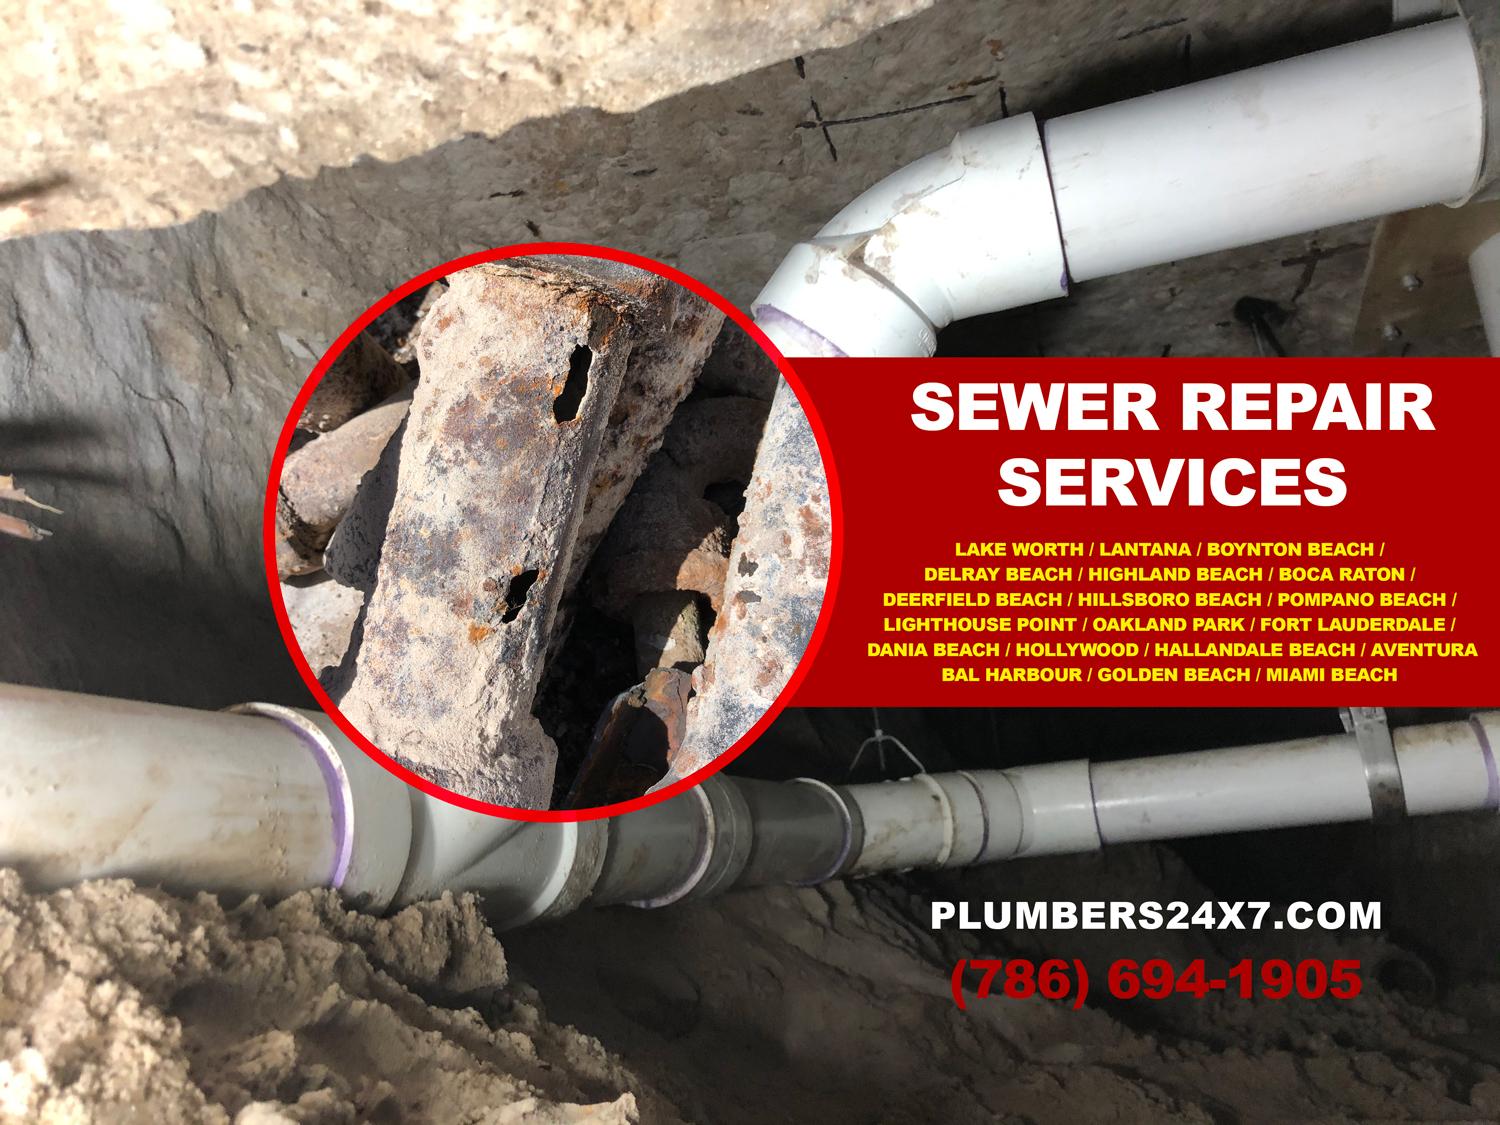 Sewer Repair Services near me in Broward County